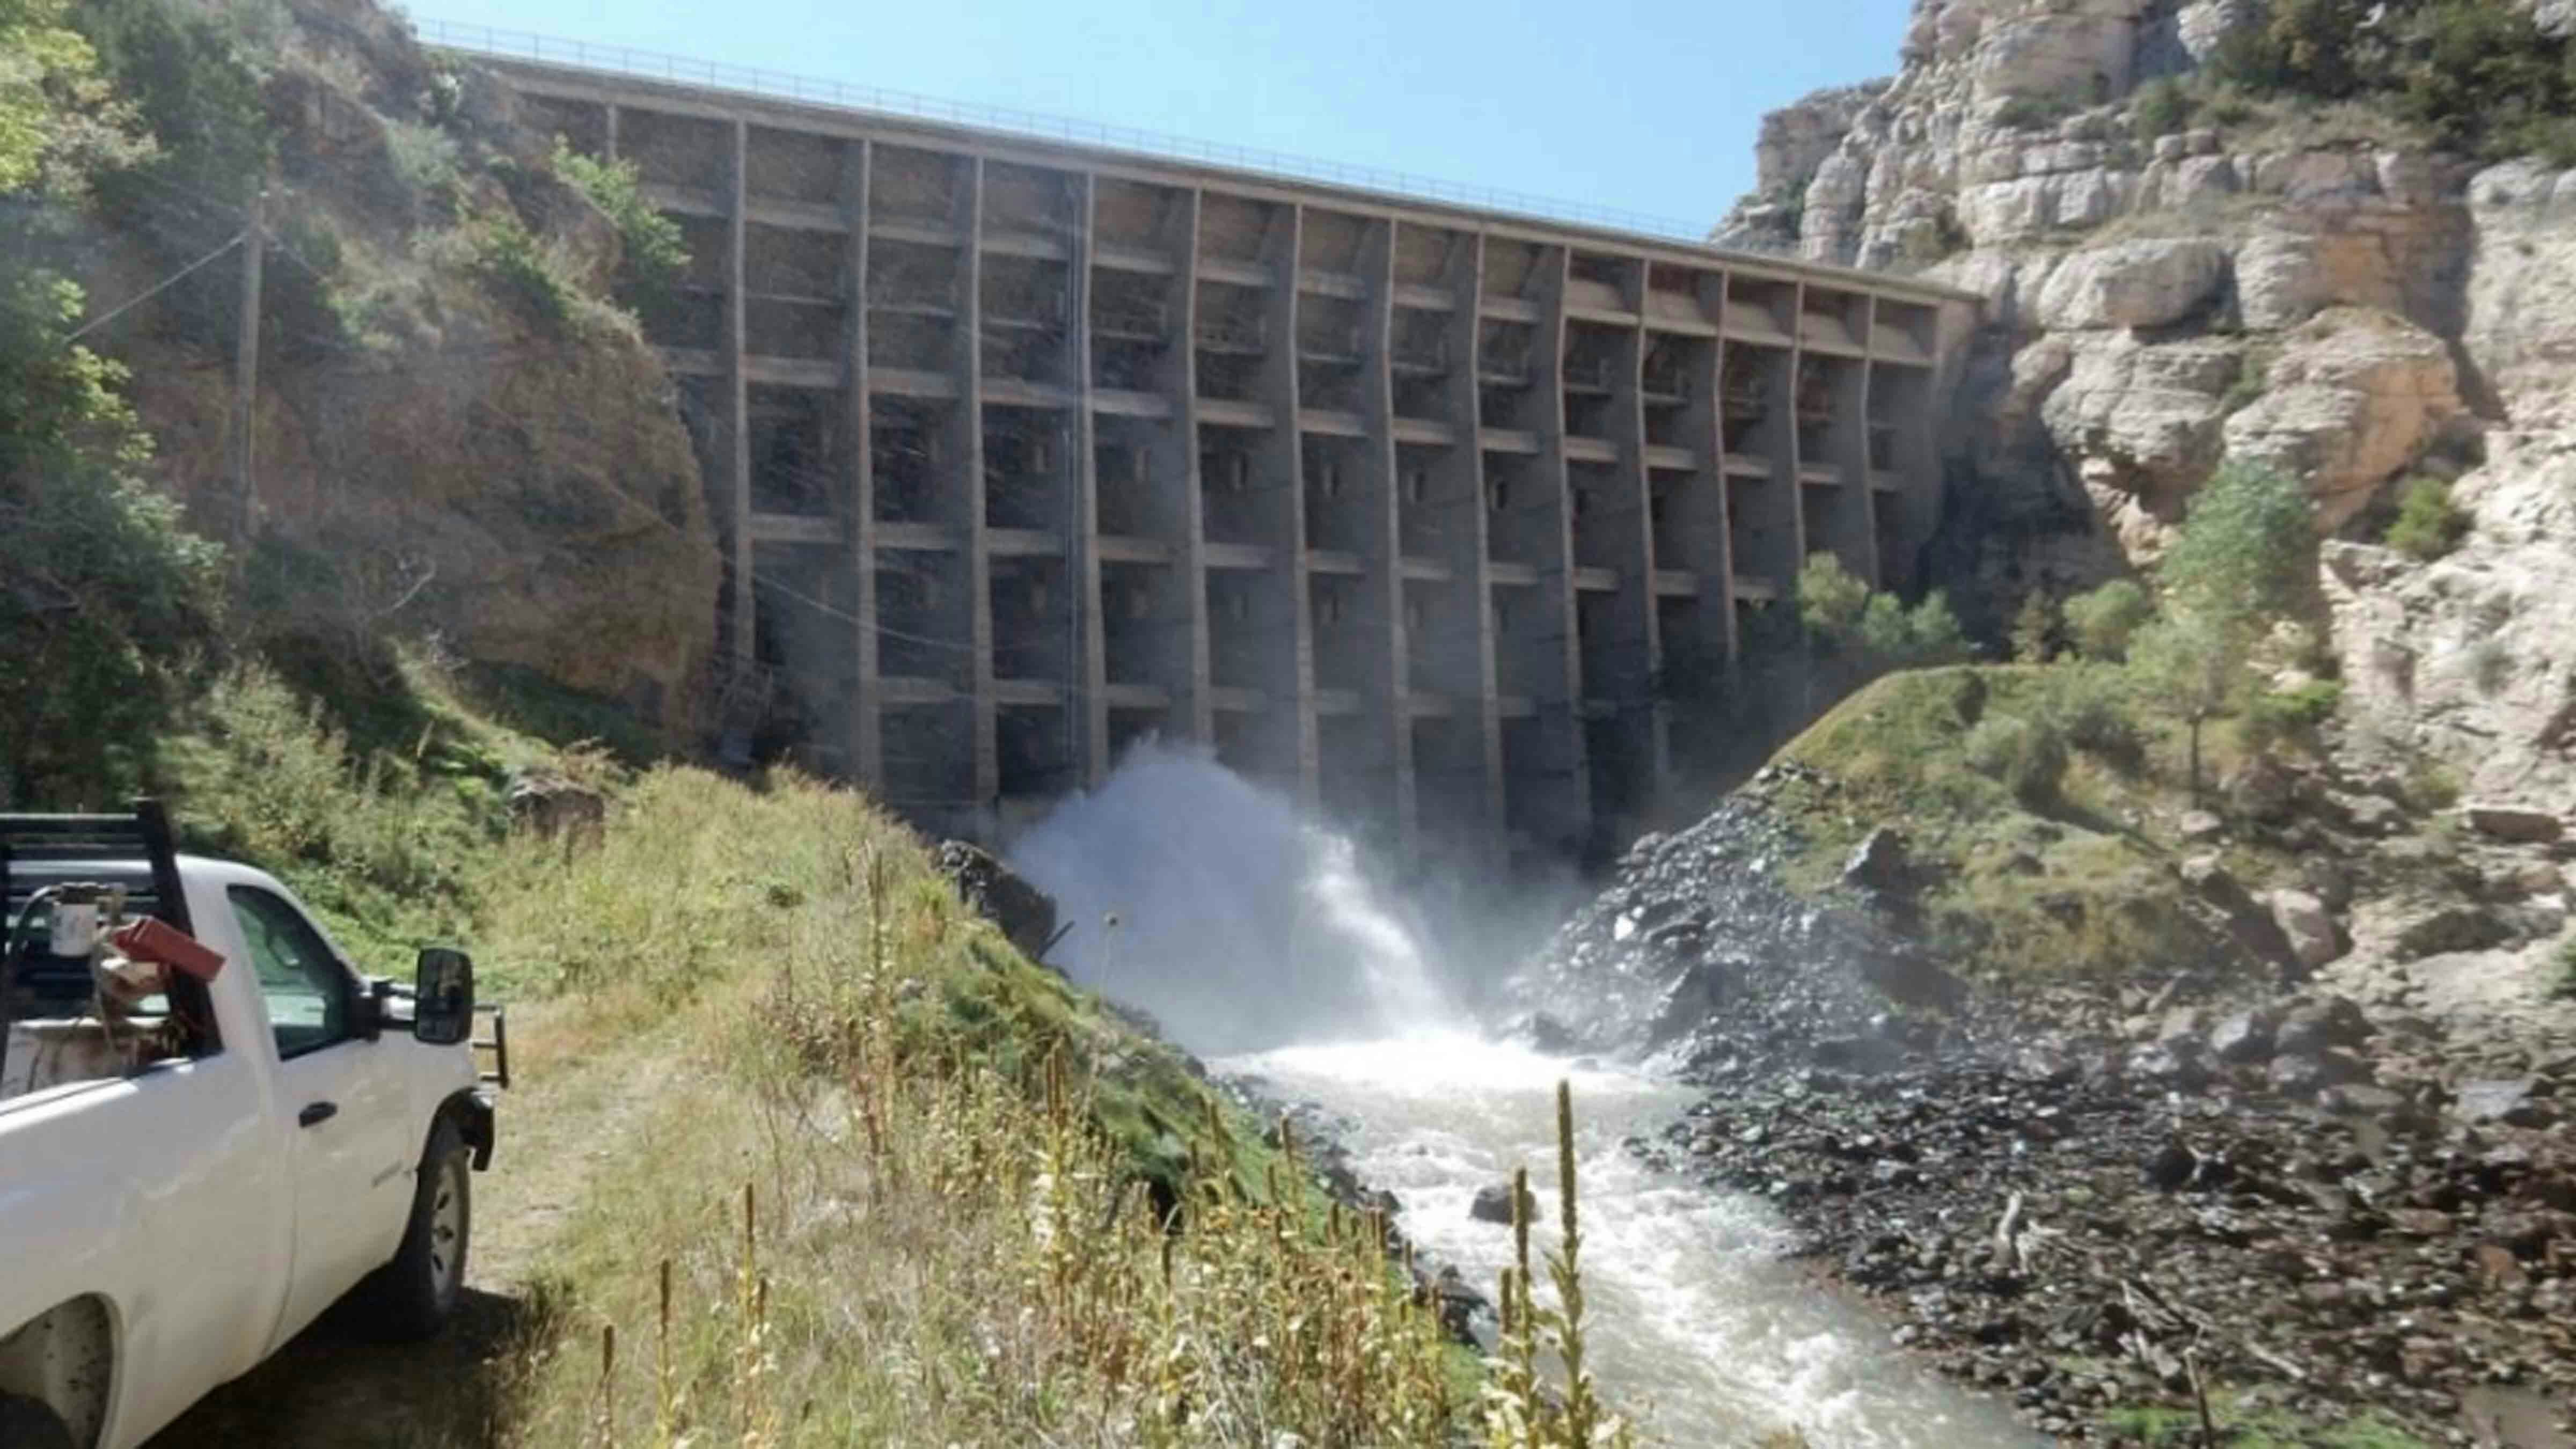 LaPrele Dam has been standing for 114 years, more than double its original 50-year lifespan.